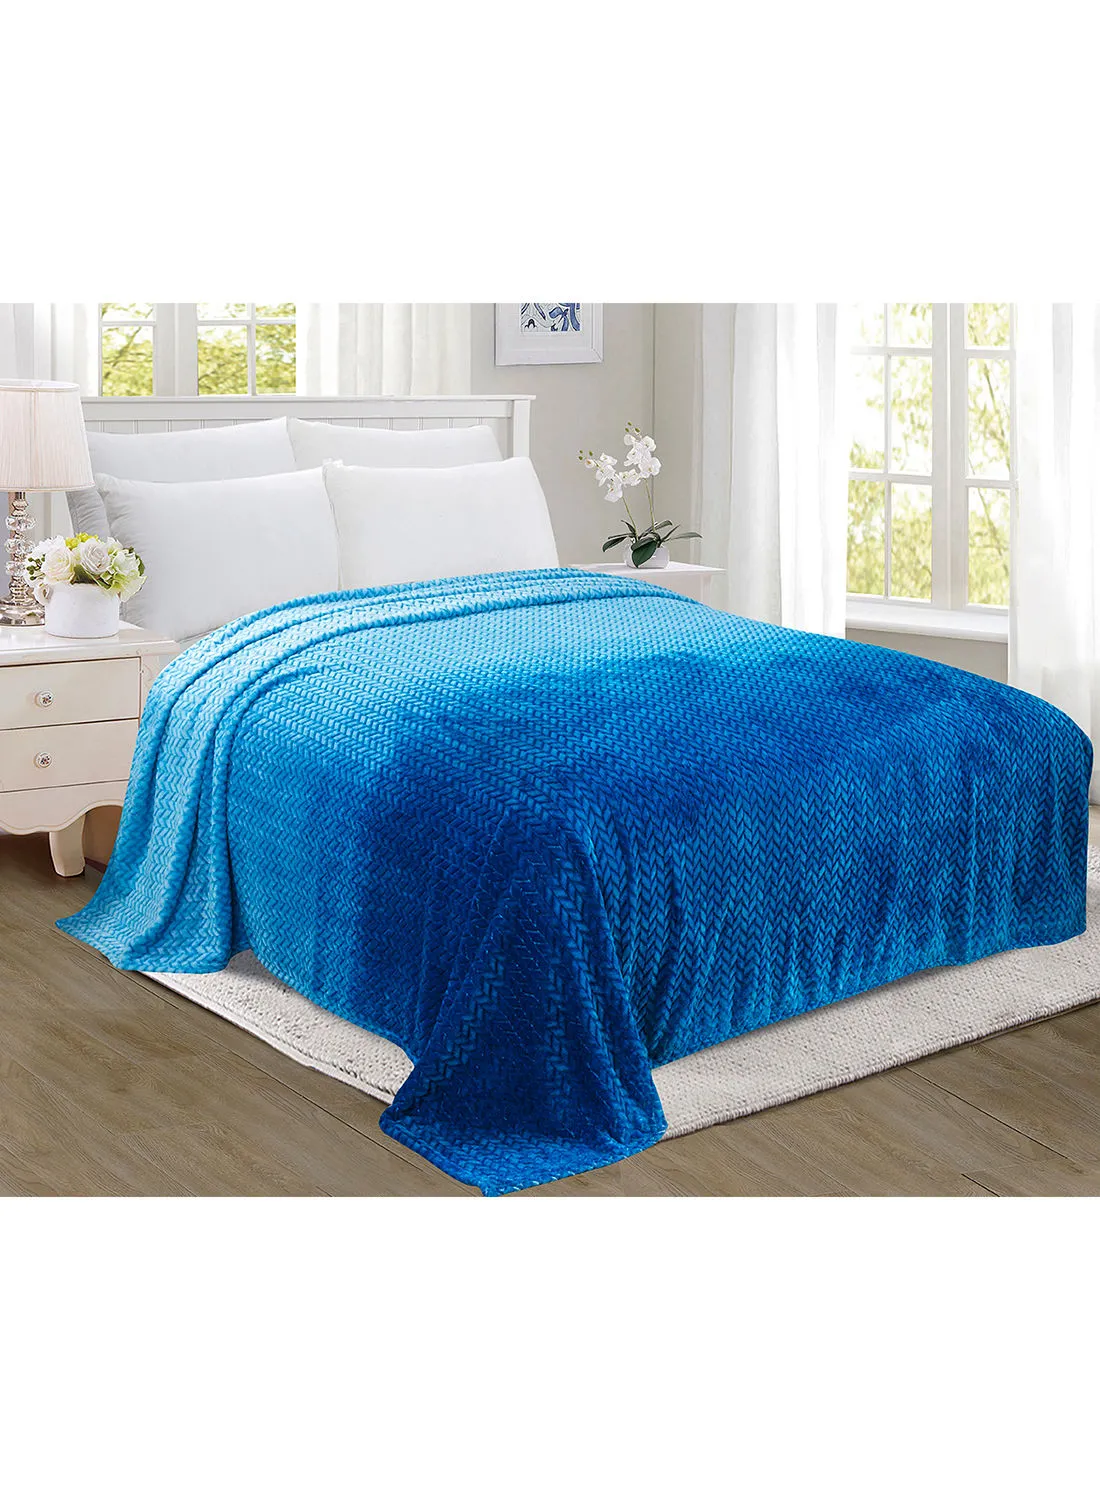 noon east Lightweight Summer Blanket Queen Size 280 GSM Jacquard Extra Soft Fleece All Season Blanket Bed And Sofa Throw  160 X 220 Cms Blue